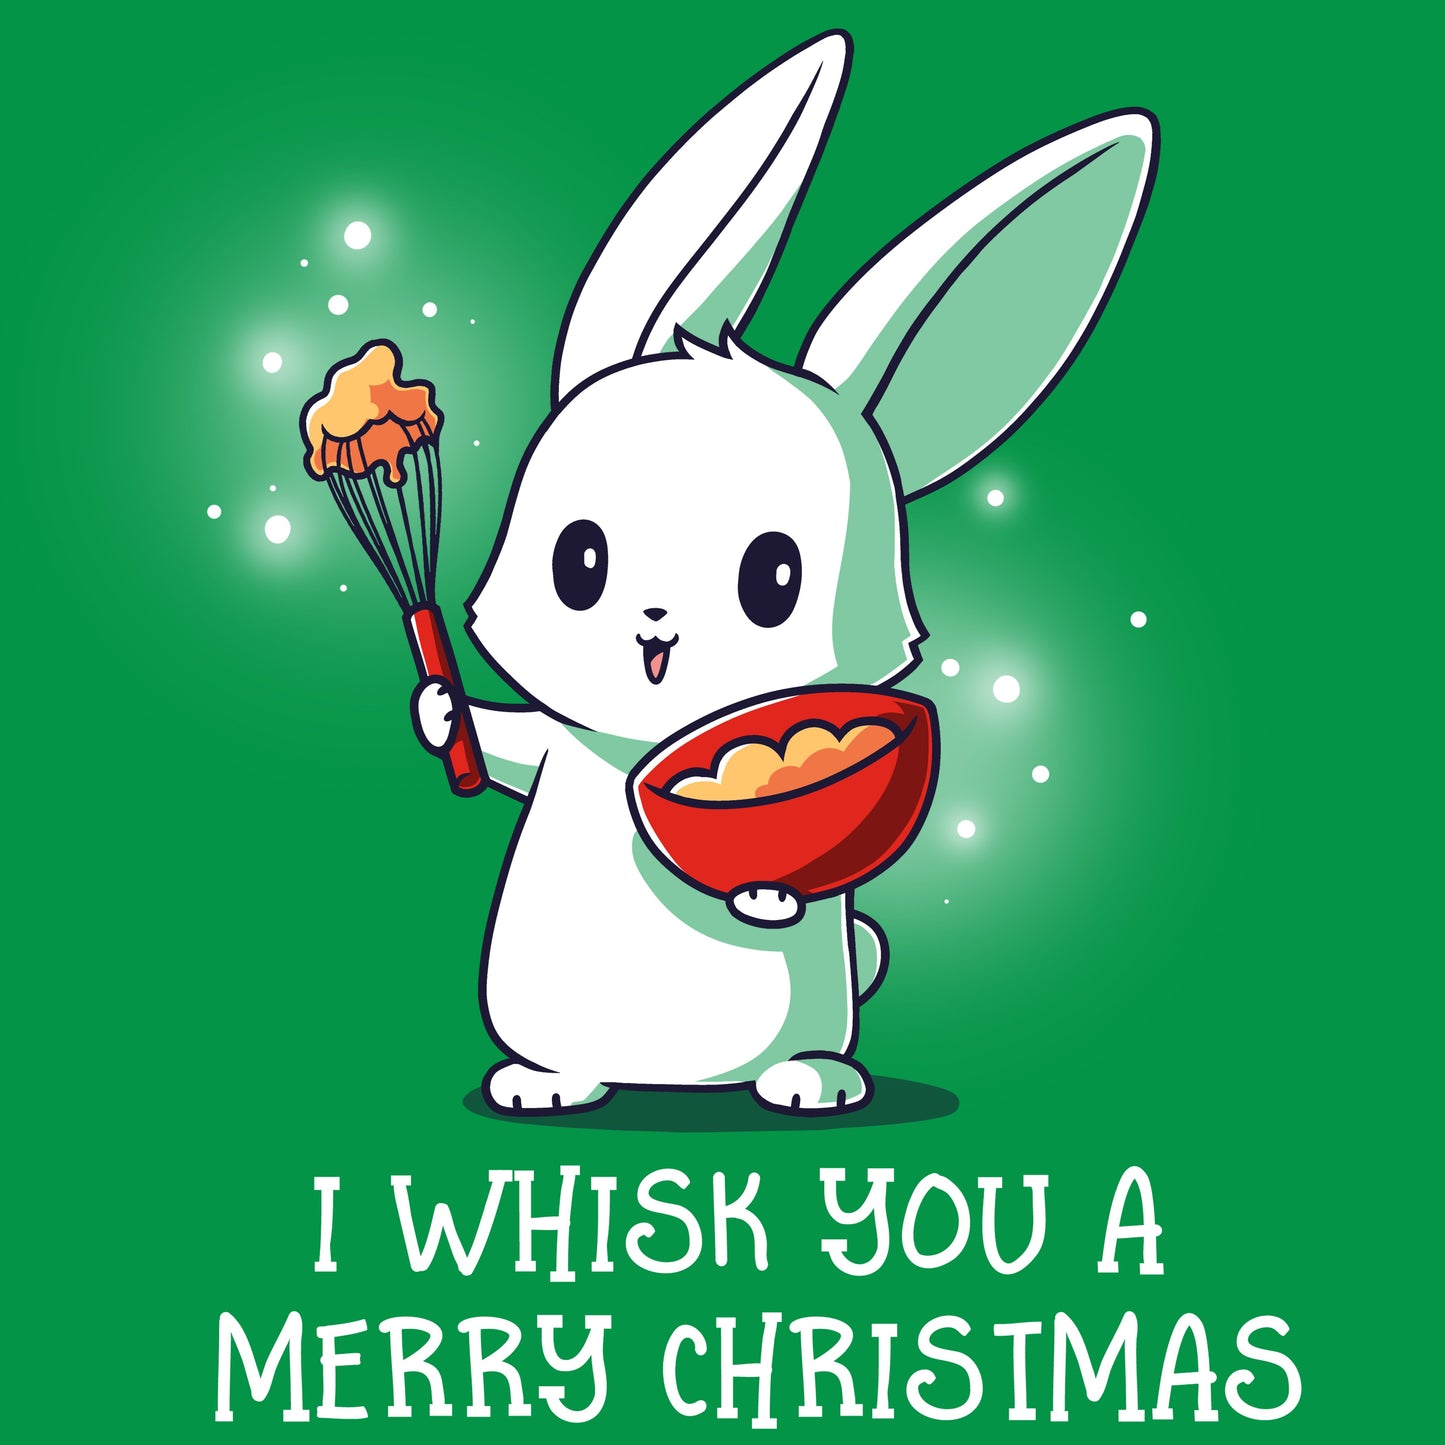 I wish you a I Whisk You A Merry Christmas New Year, TeeTurtle.